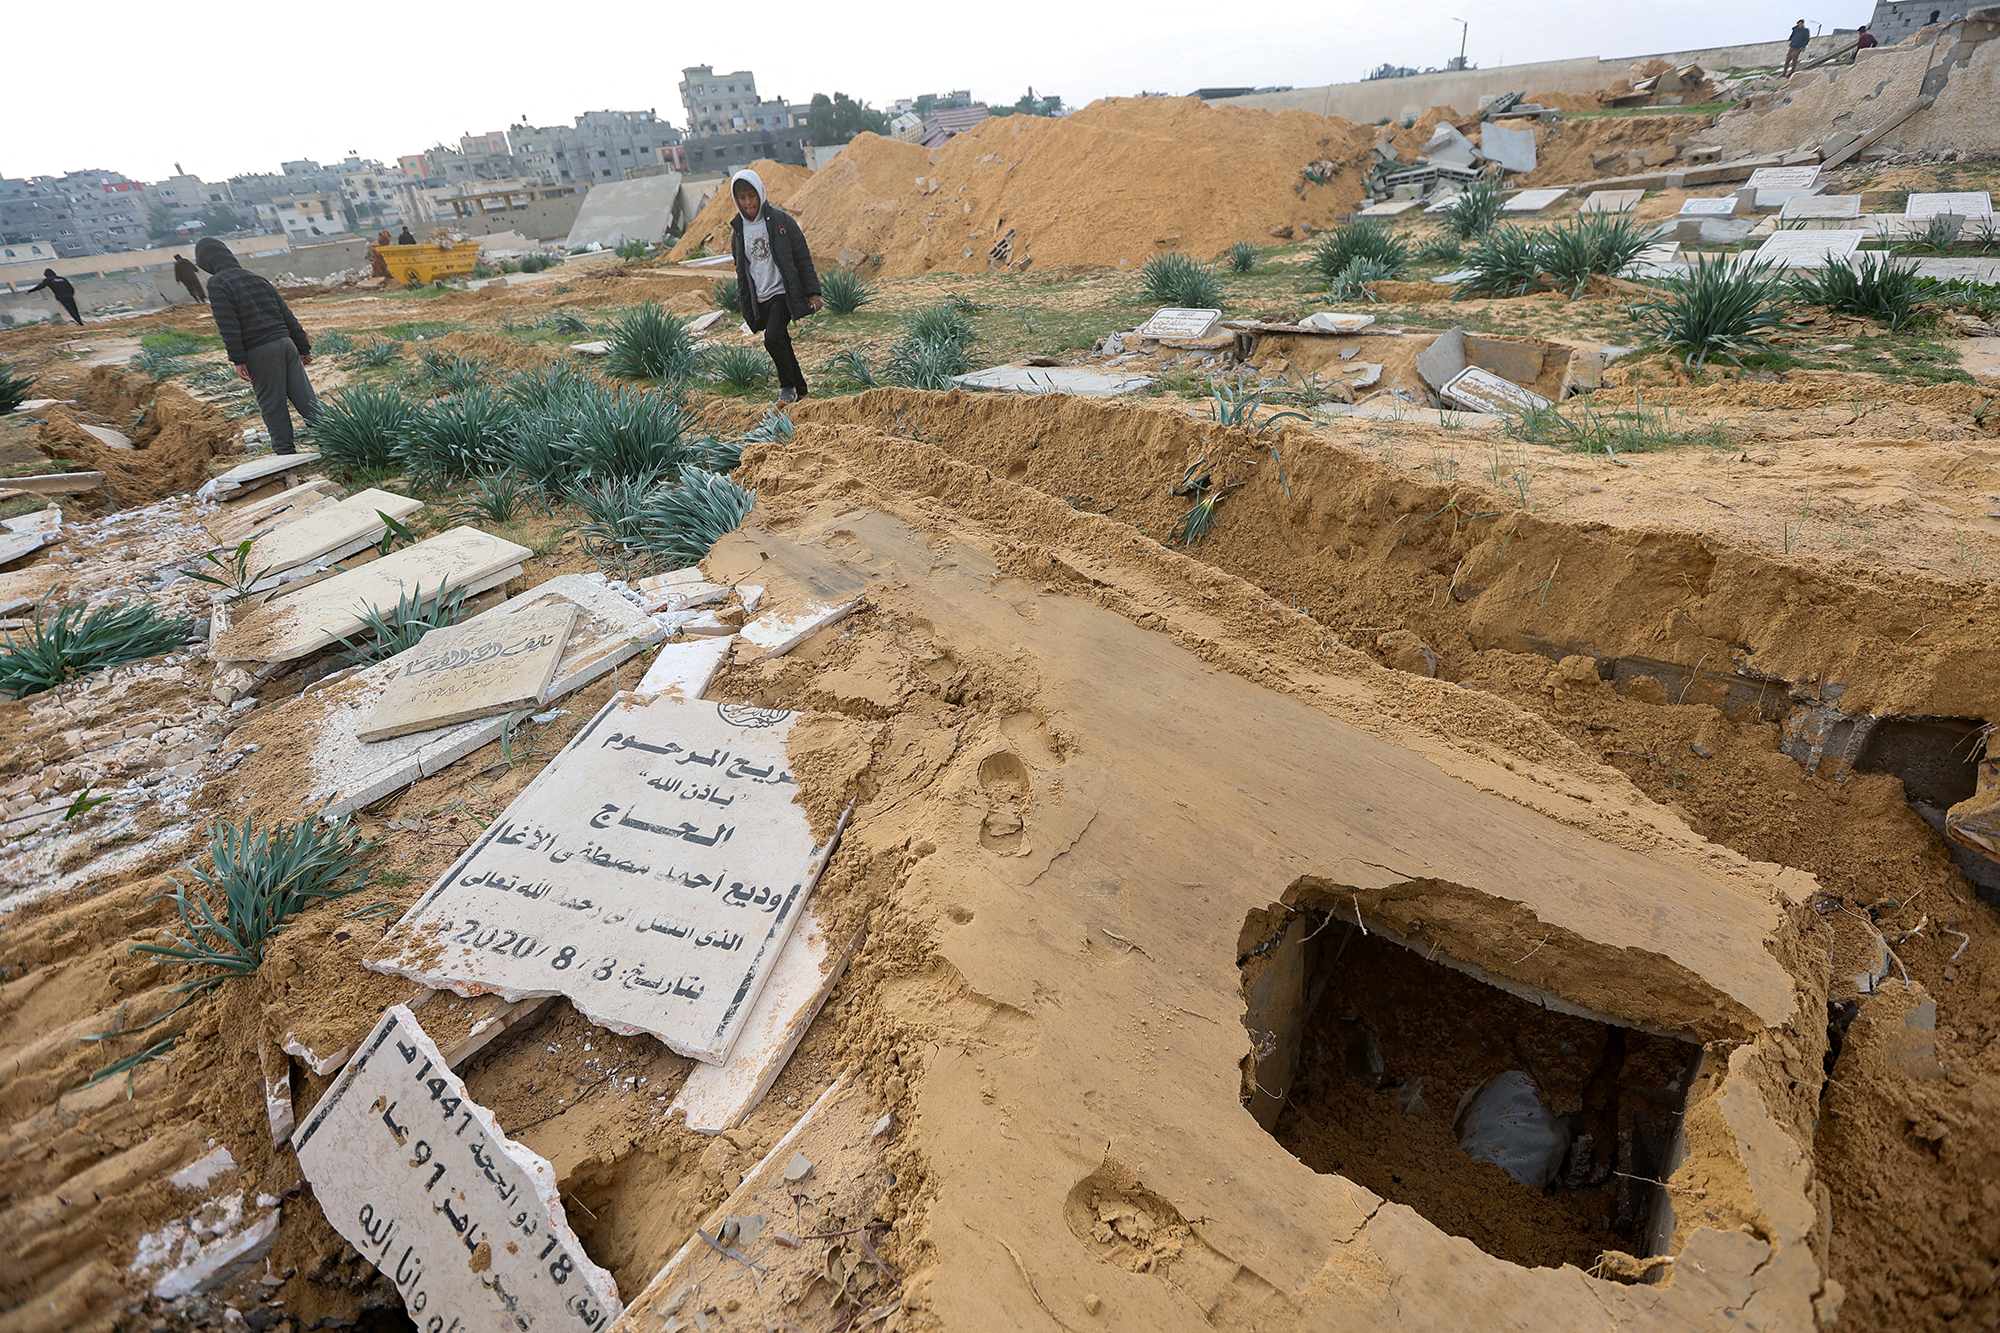 Palestinians check damaged graves at a cemetery following an Israeli raid in Khan Younis, Gaza, on January 17.